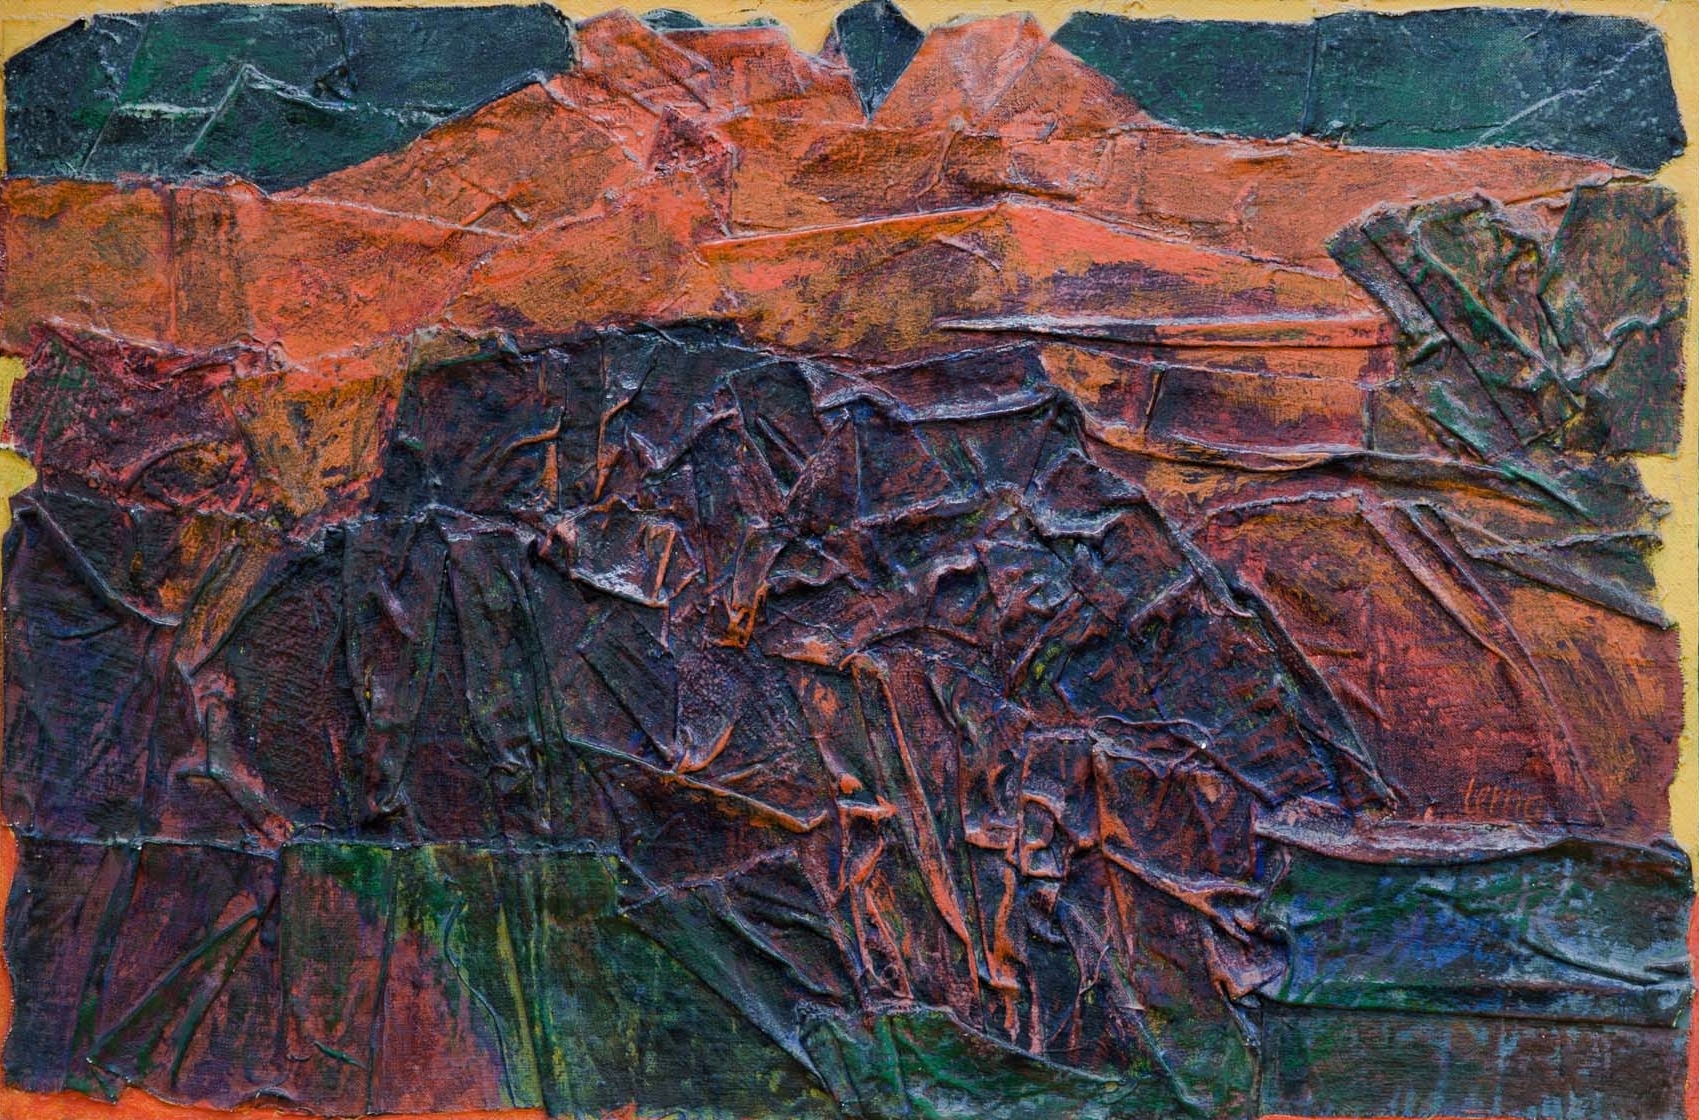   Craggy Cliff , July 1966, Canvas construction and acrylic on masonite, 24 x 36 in 